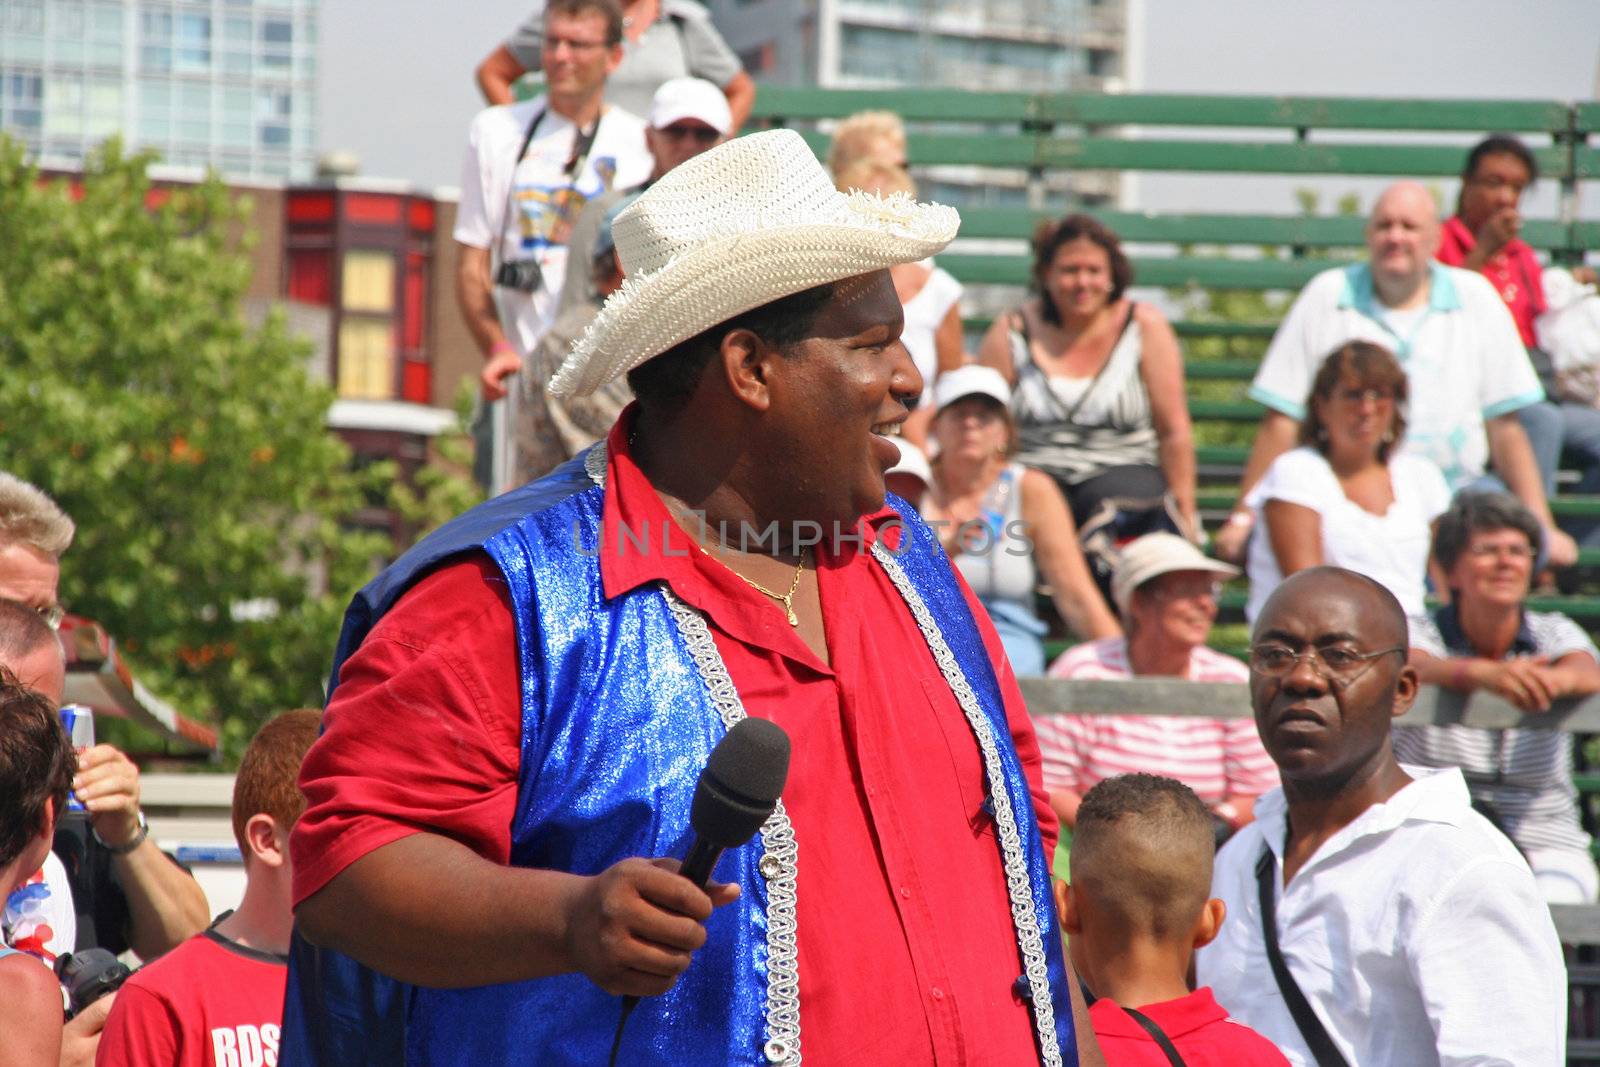 ROTTERDAM - SUMMER CARNIVAL, JULY 26, 2008. TV Showman Quintis Ristie at the Caribbean carnival parade in Rotterdam on July 26.